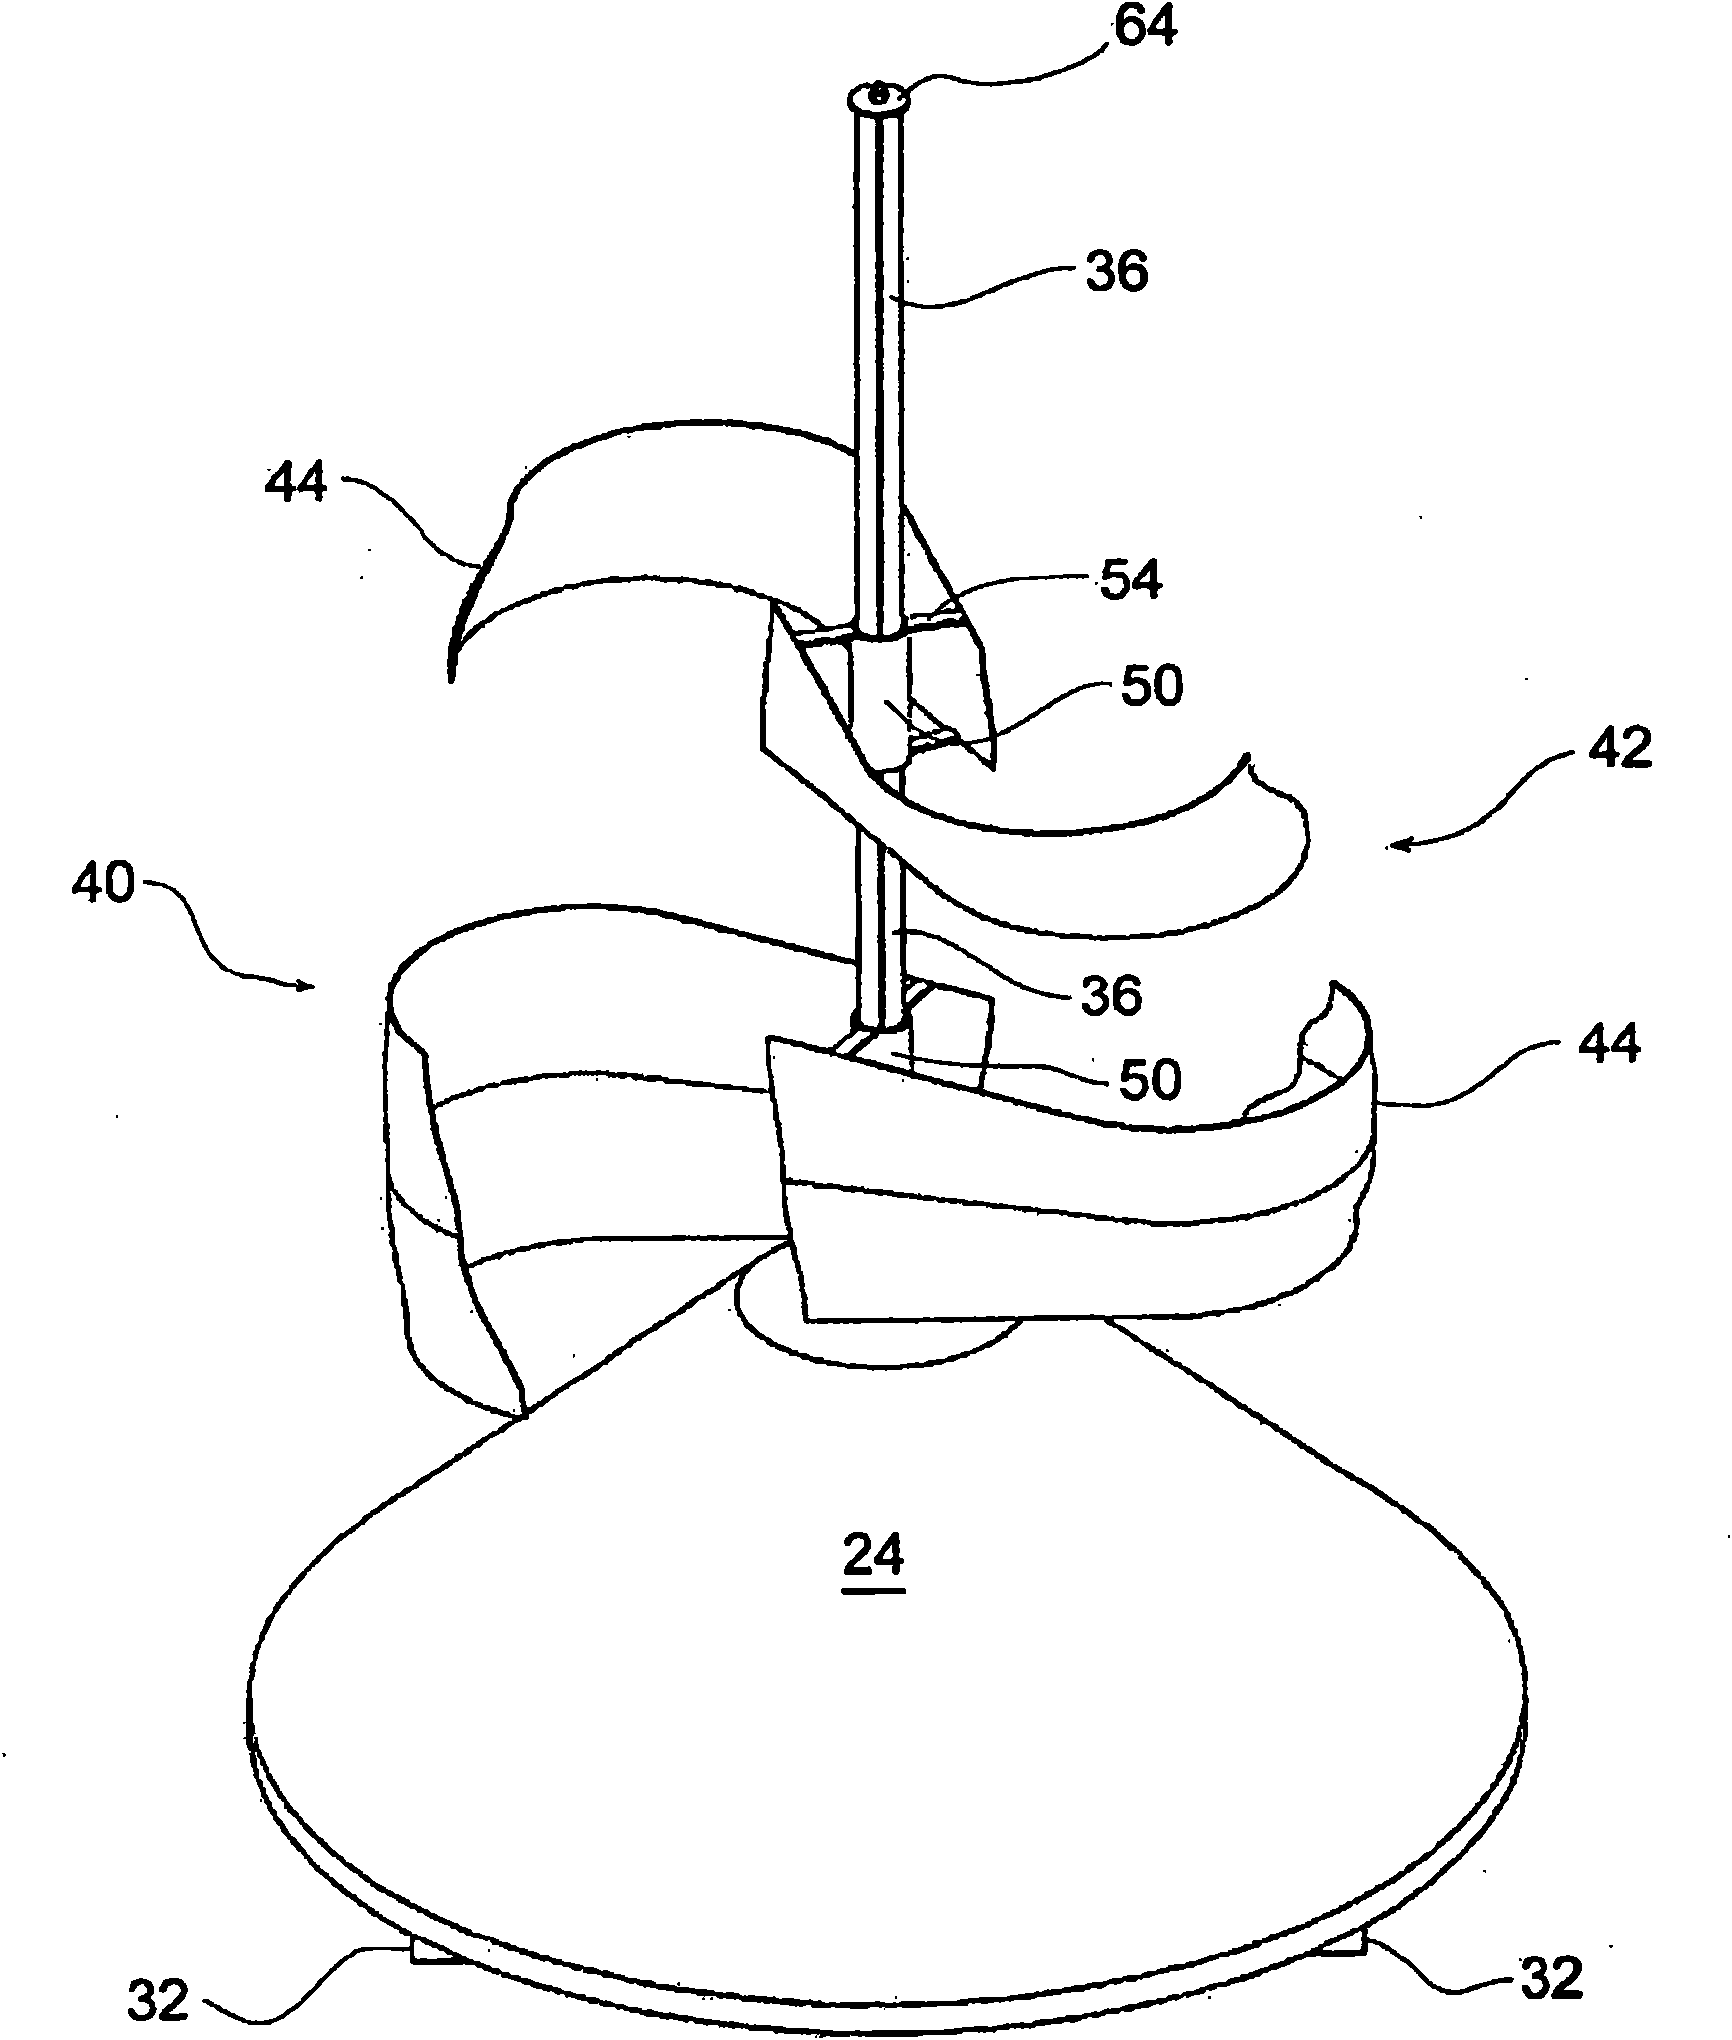 Wind-driven electricity generation device with savonius rotor